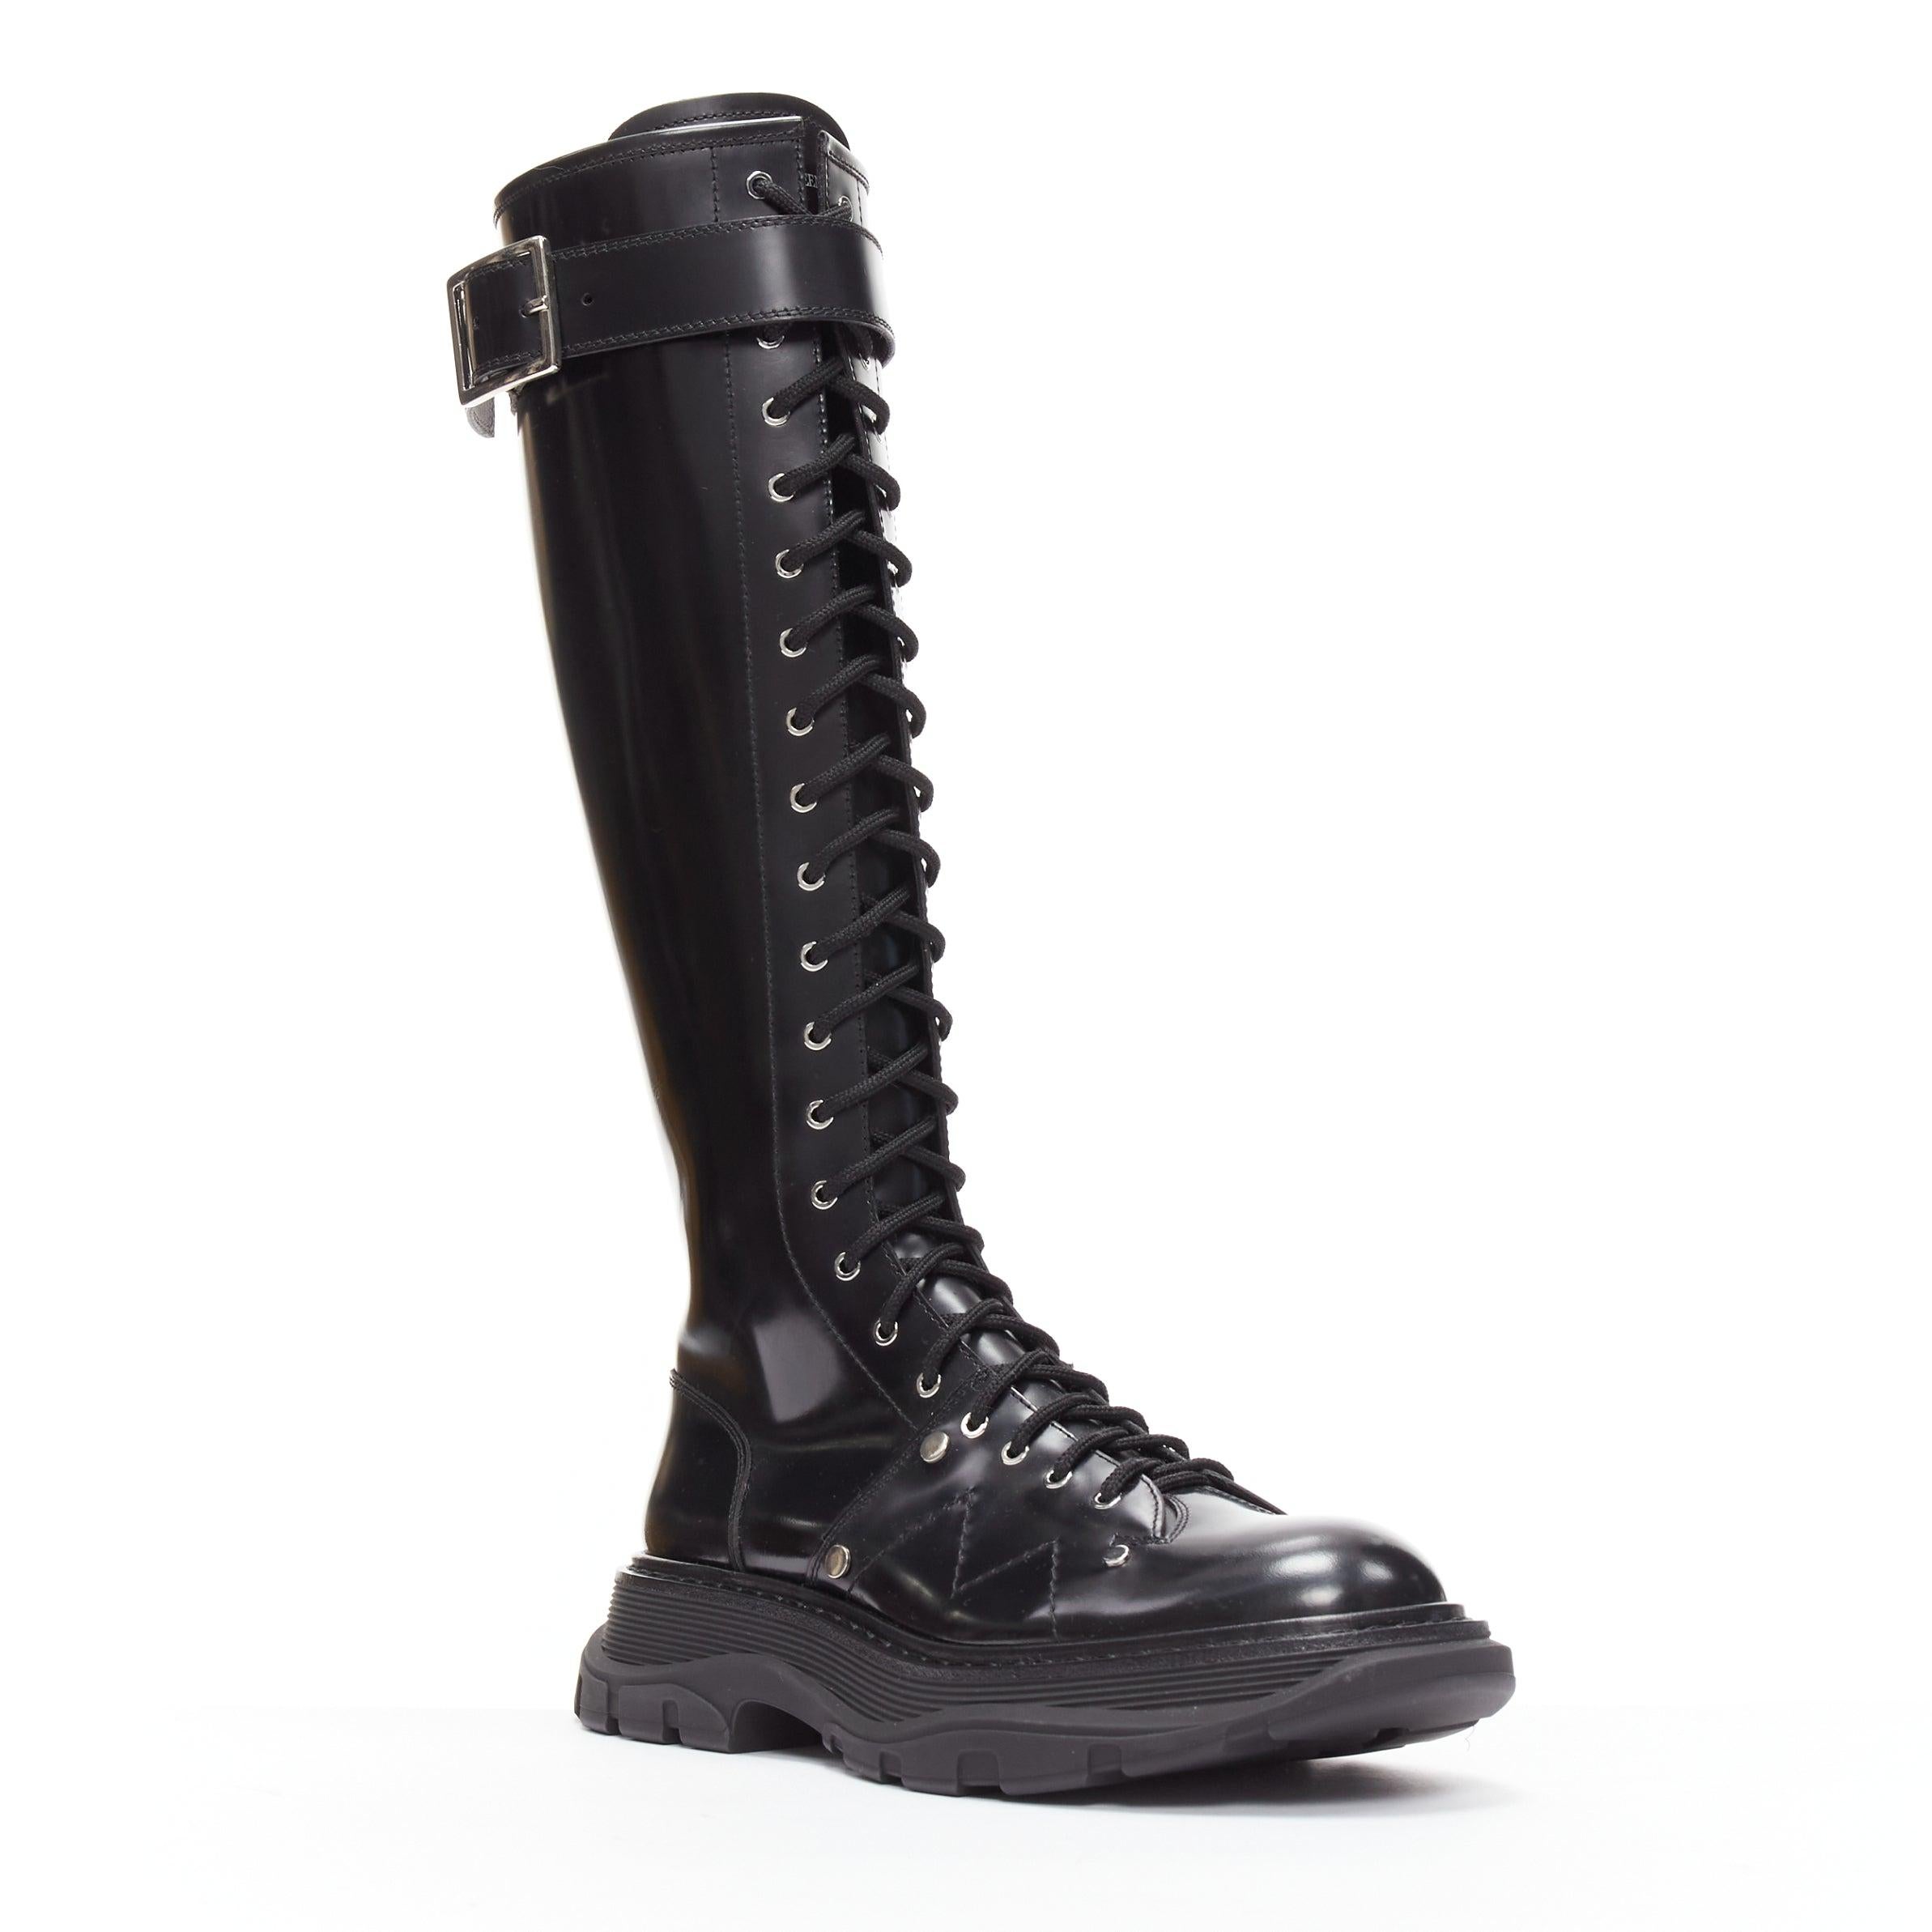 ALEXANDER MCQUEEN Tread black leather lace up combat knee high boot EU39
Reference: AAWC/A00558
Brand: Alexander McQueen
Designer: Sarah Burton
Model: Tread
Material: Leather
Color: Black, Silver
Pattern: Solid
Closure: Zip
Lining: Black